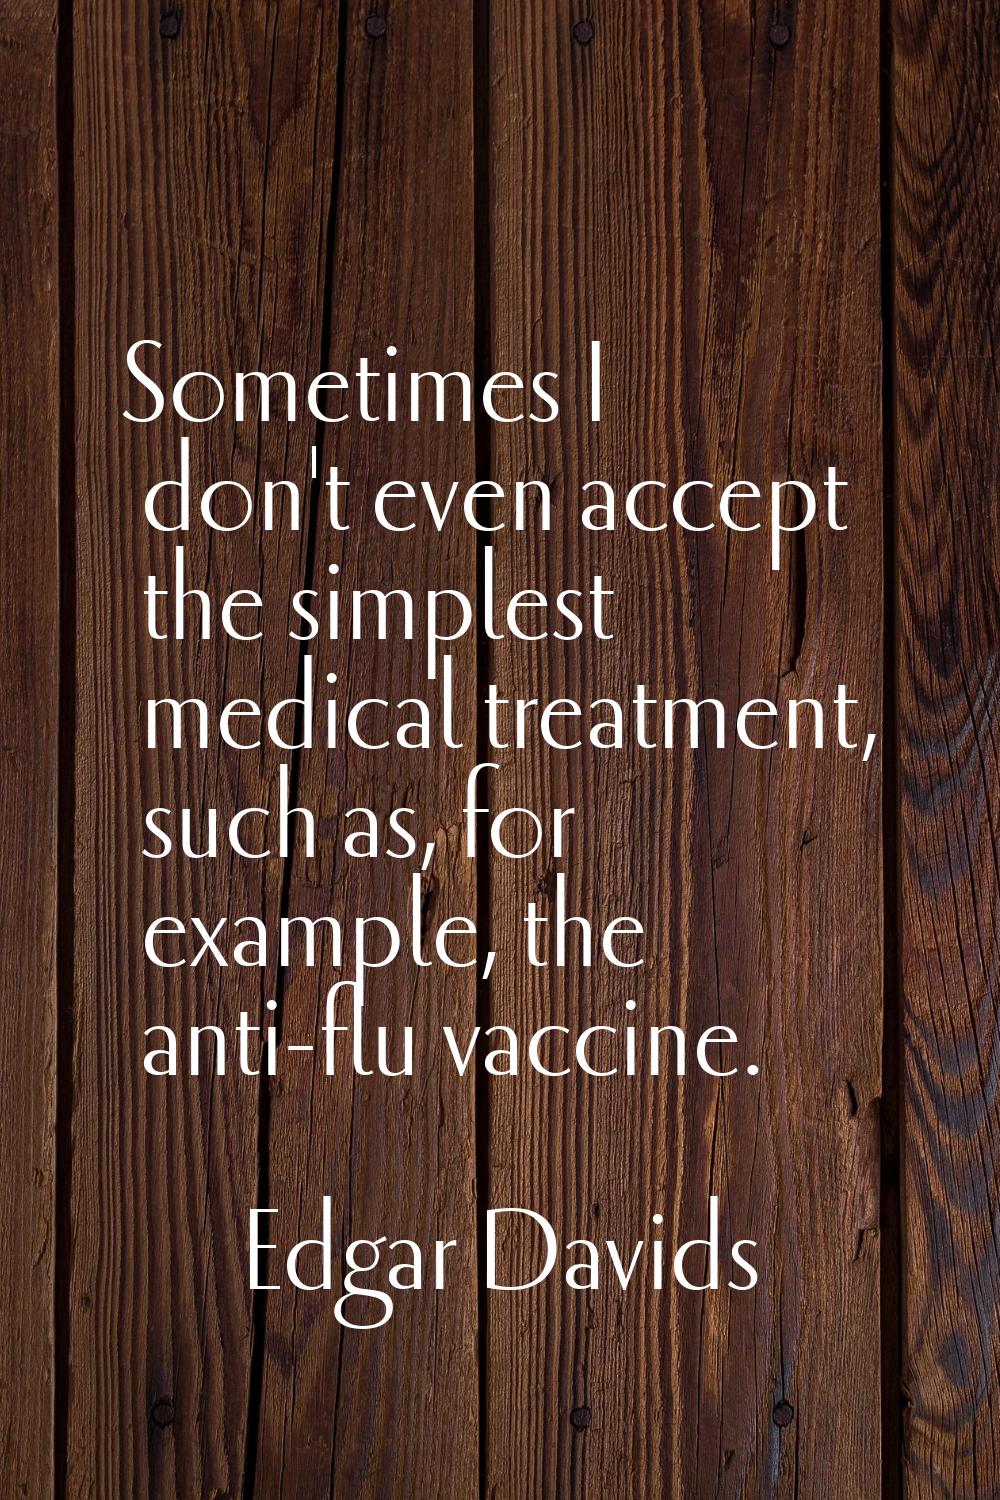 Sometimes I don't even accept the simplest medical treatment, such as, for example, the anti-flu va